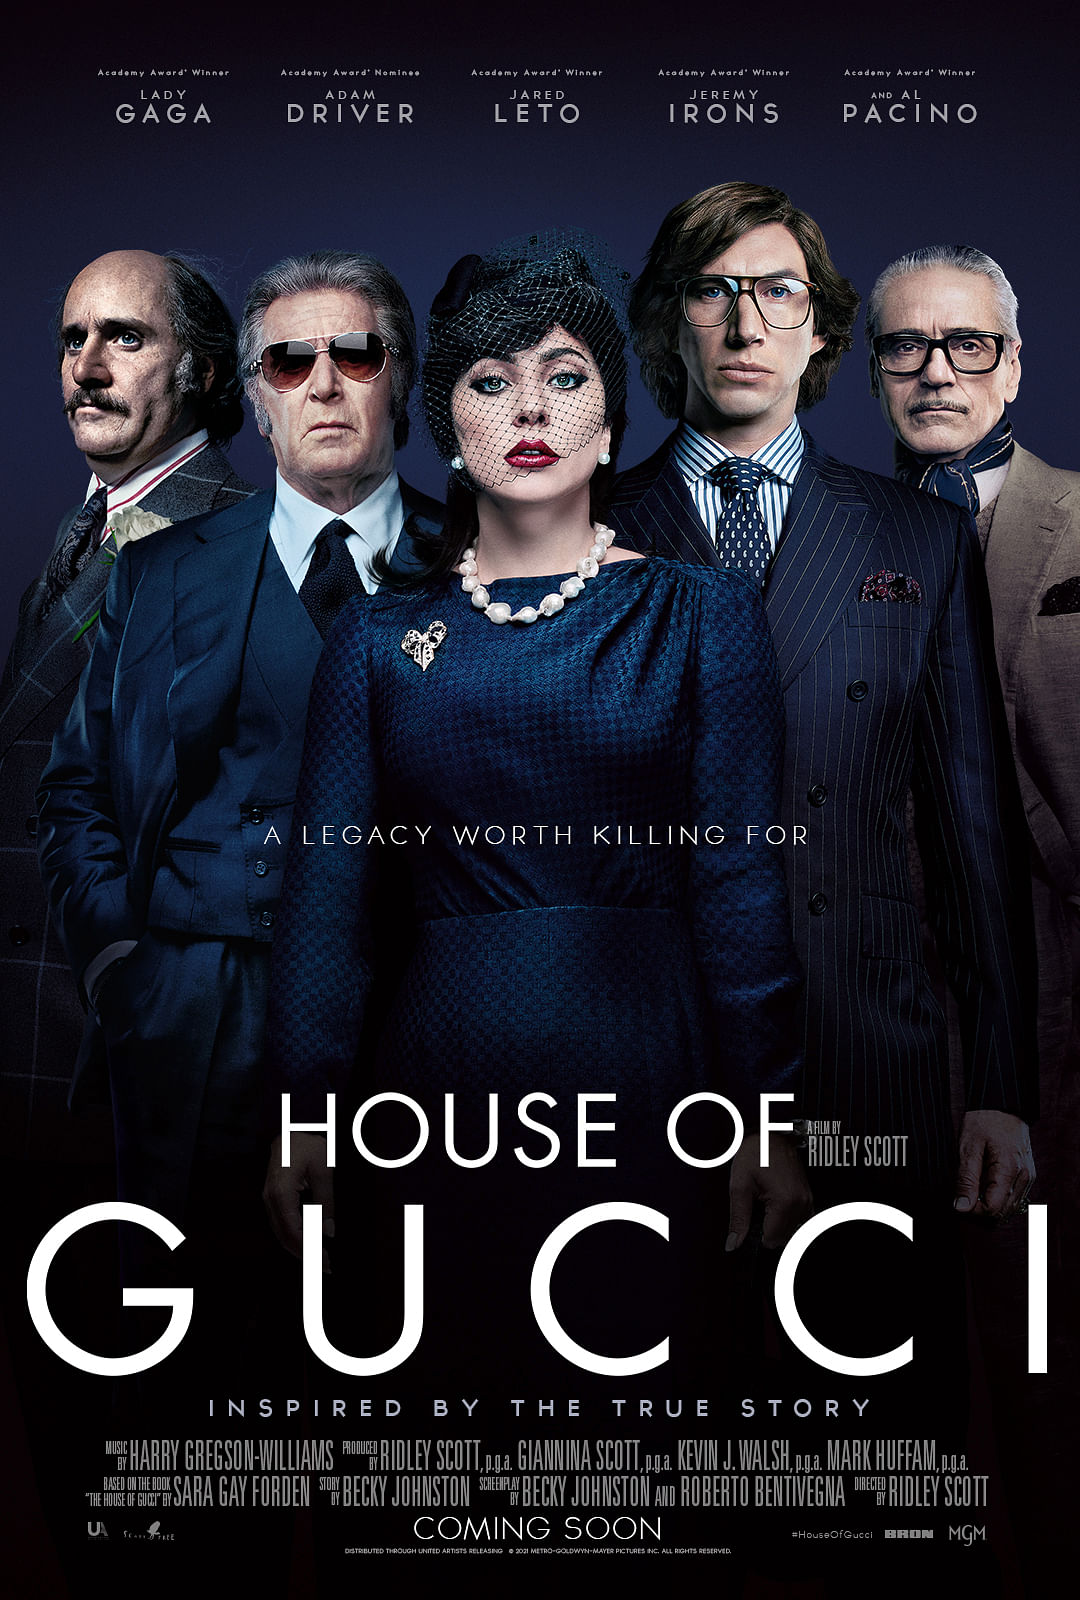 Review of Ridley Scott's 'House of Gucci' starring Lady Gaga, Adam Driver and Al Pacino.